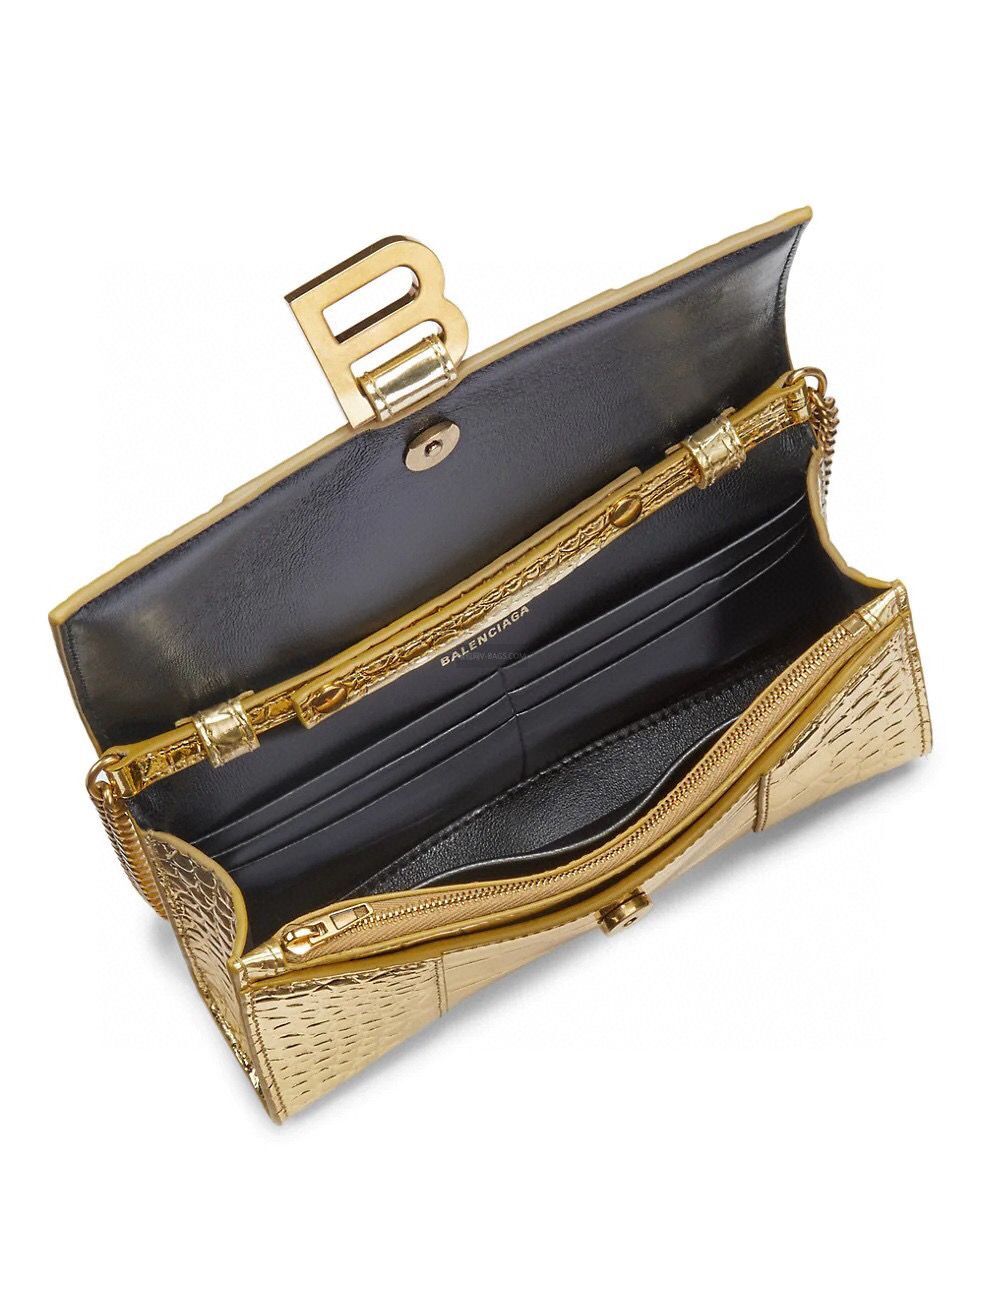 Balenciaga HOURGLASS Wallet With Chain Crocodile Embossed 656050 Gold